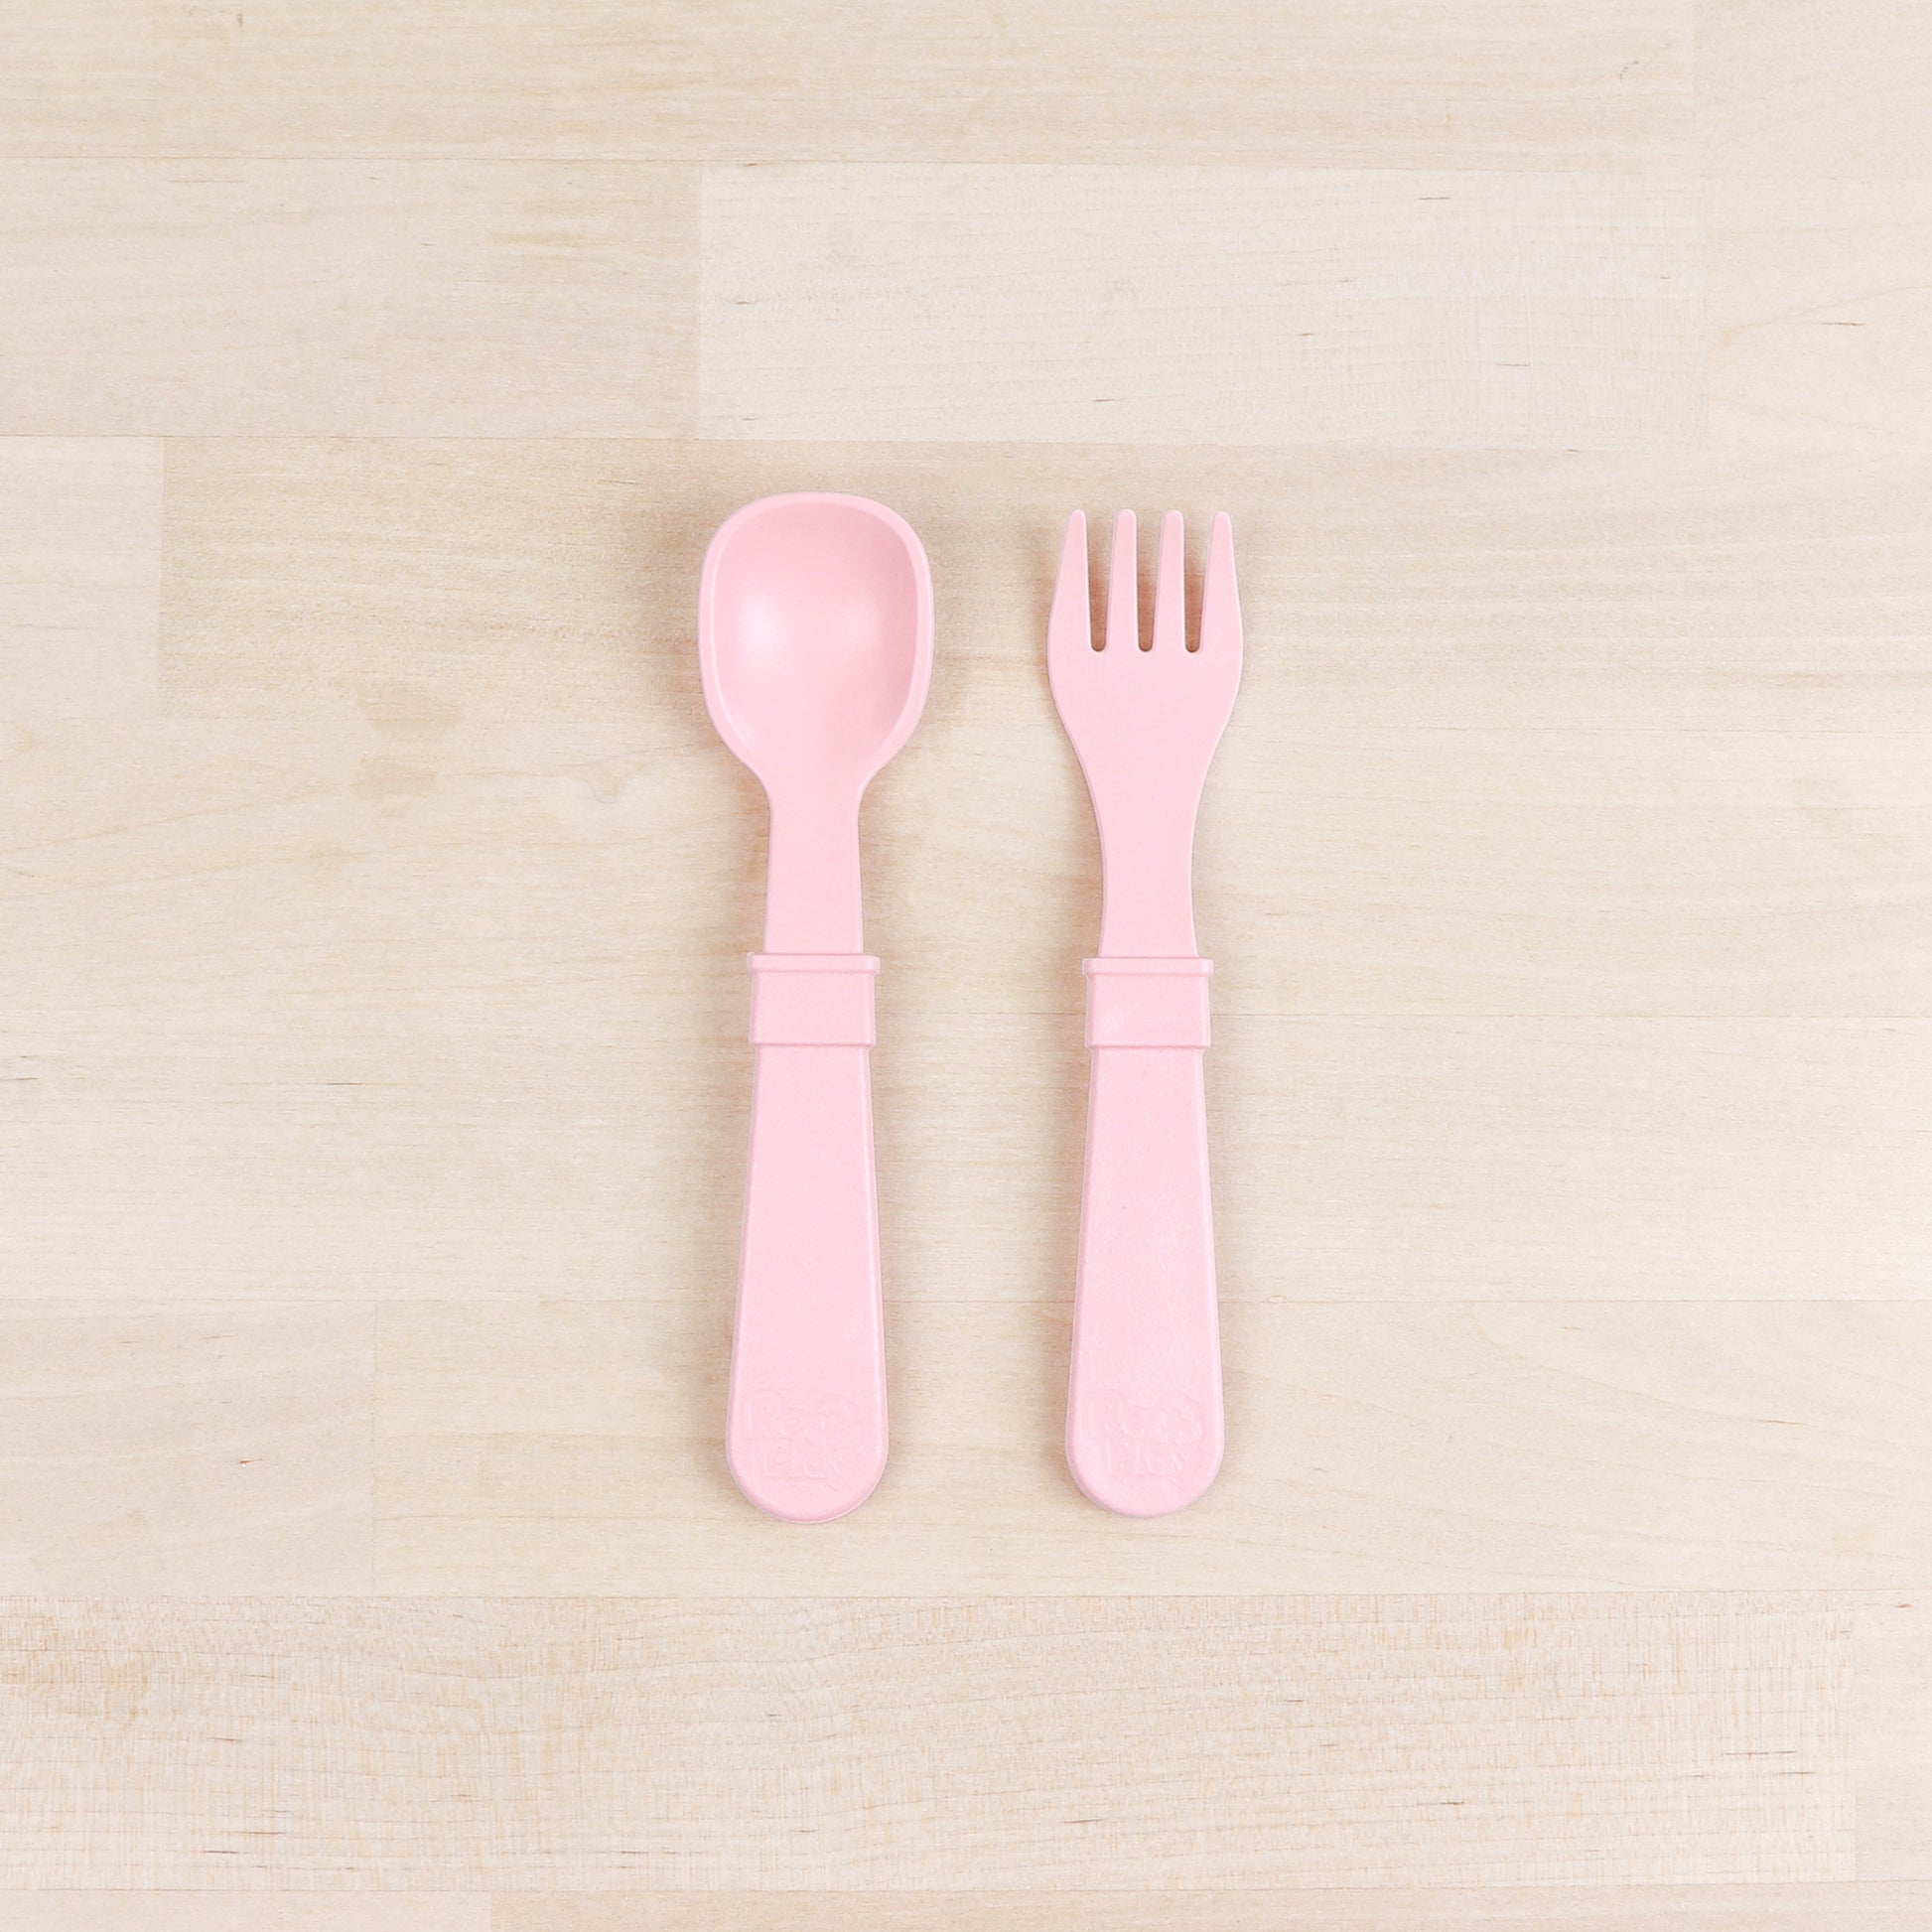 Re-Play Utensil Set | Ice Pink Fork & Spoon from Bear & Moo